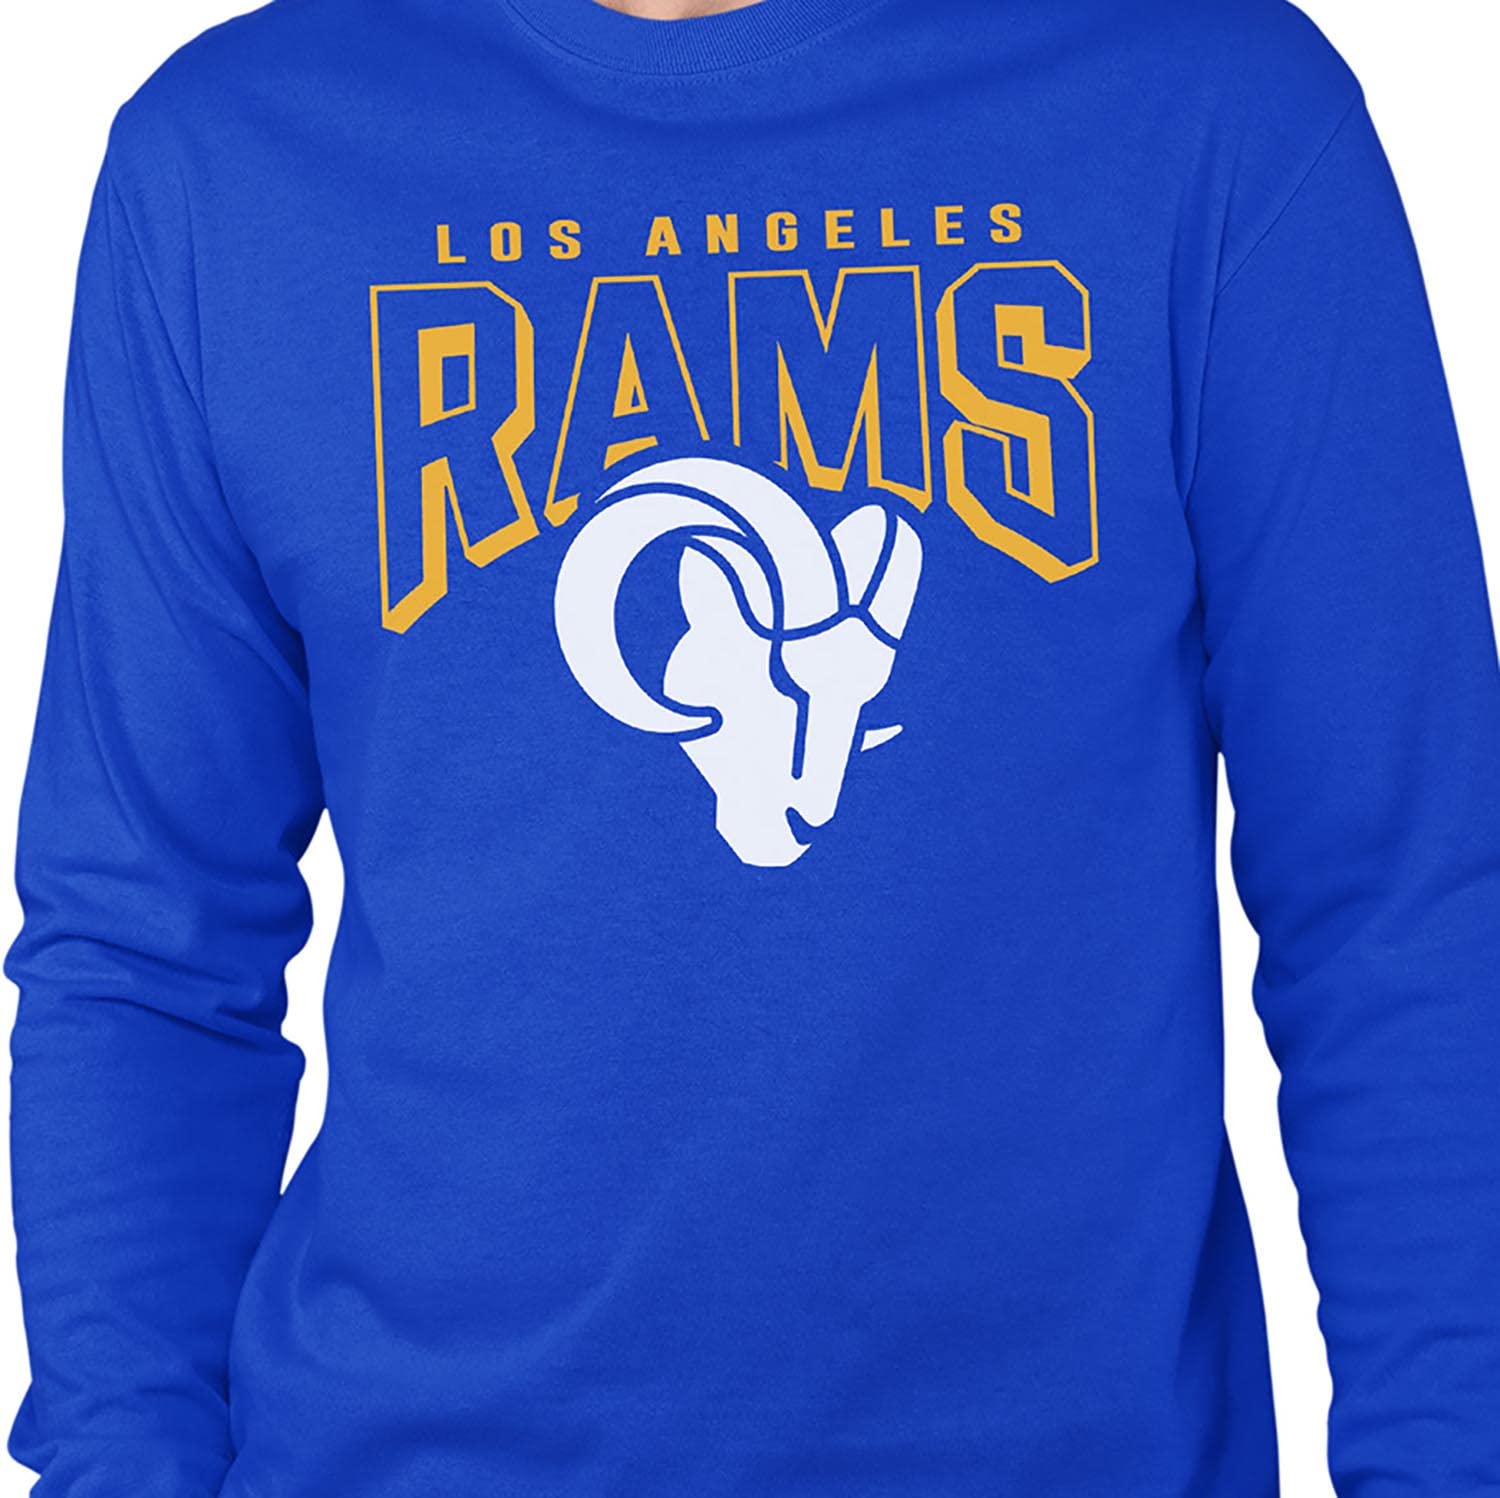 Junk Food Clothing x NFL - Los Angeles Rams - Bold Logo - Unisex Adult Long Sleeve T-Shirt for Men and Women - Size XX-Large